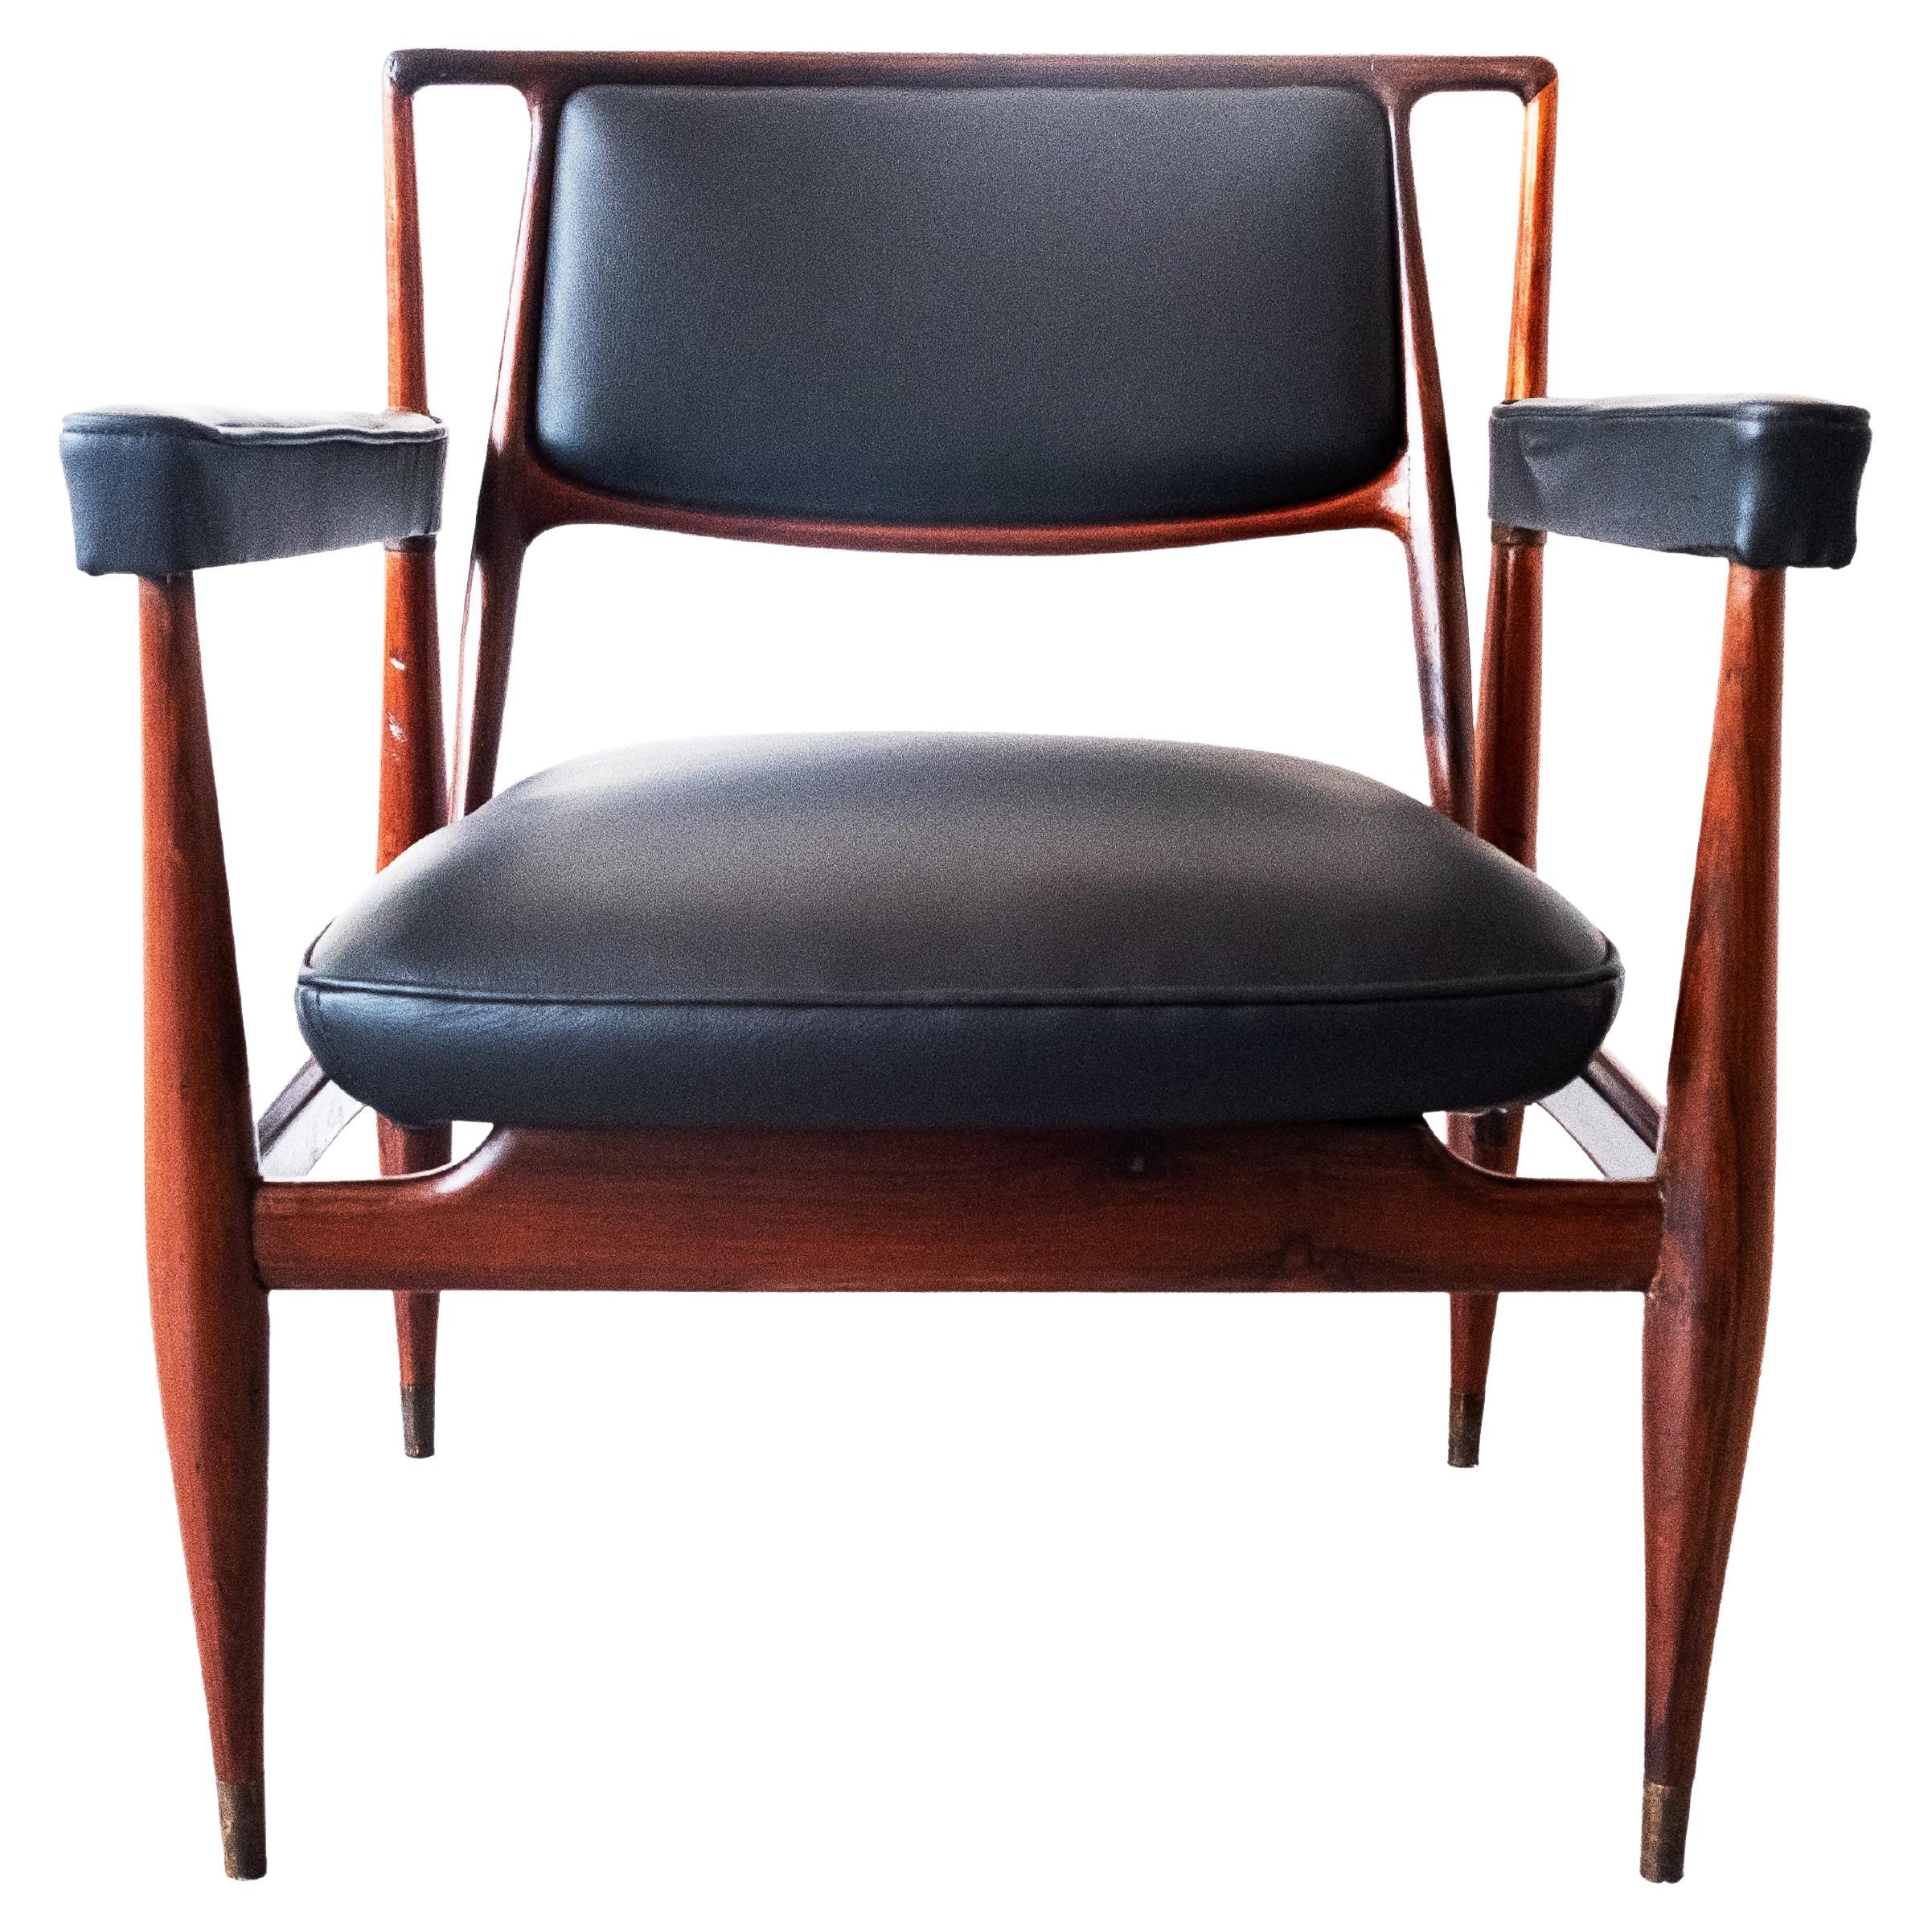 Solid Wood rare Armchair by Moveis Ambiente, Brazil, 1960s